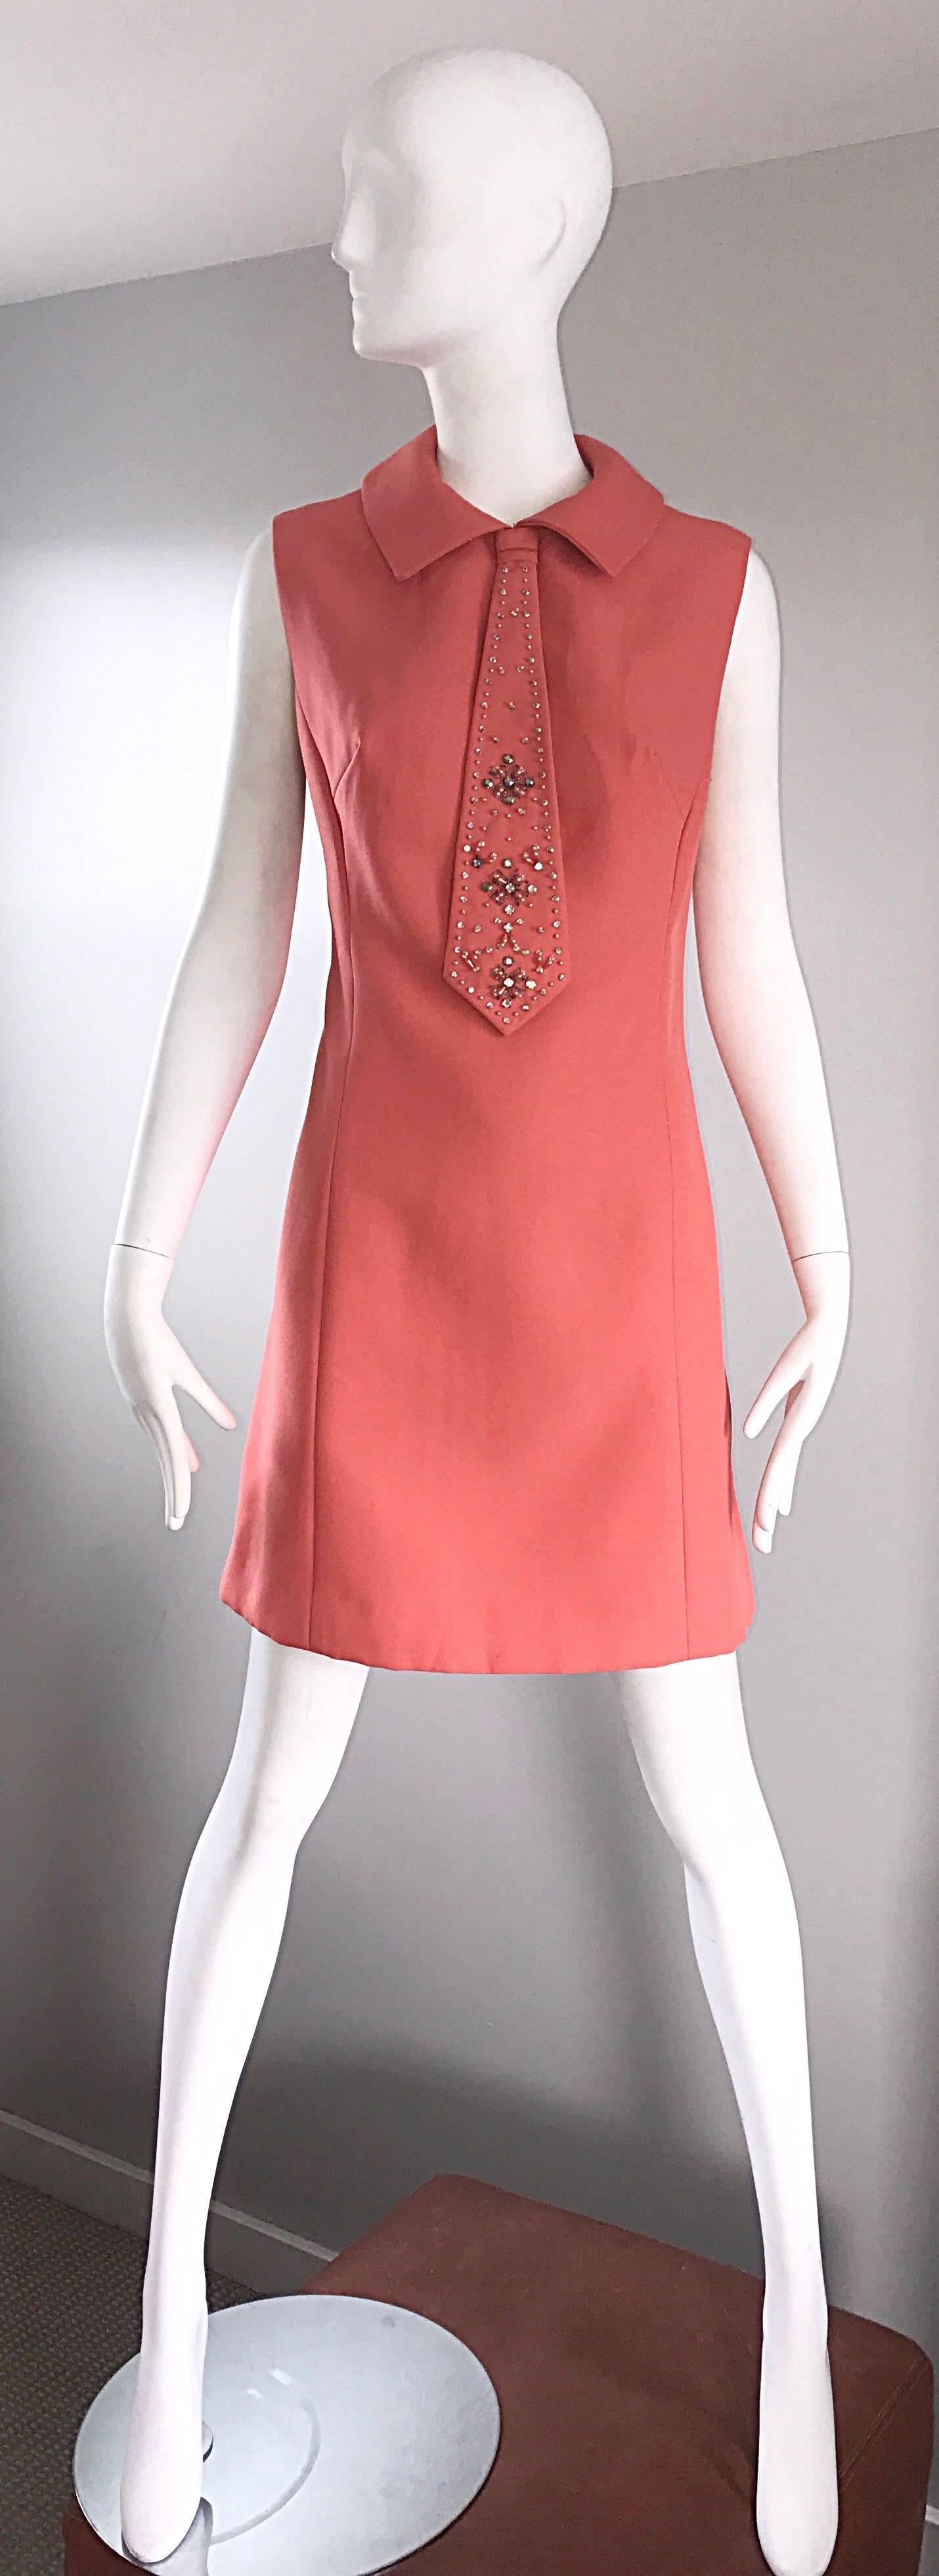 Chic 1960s Coral Salmon Pink Beaded Necktie Vintage A - Line 60s Shift Dress 2